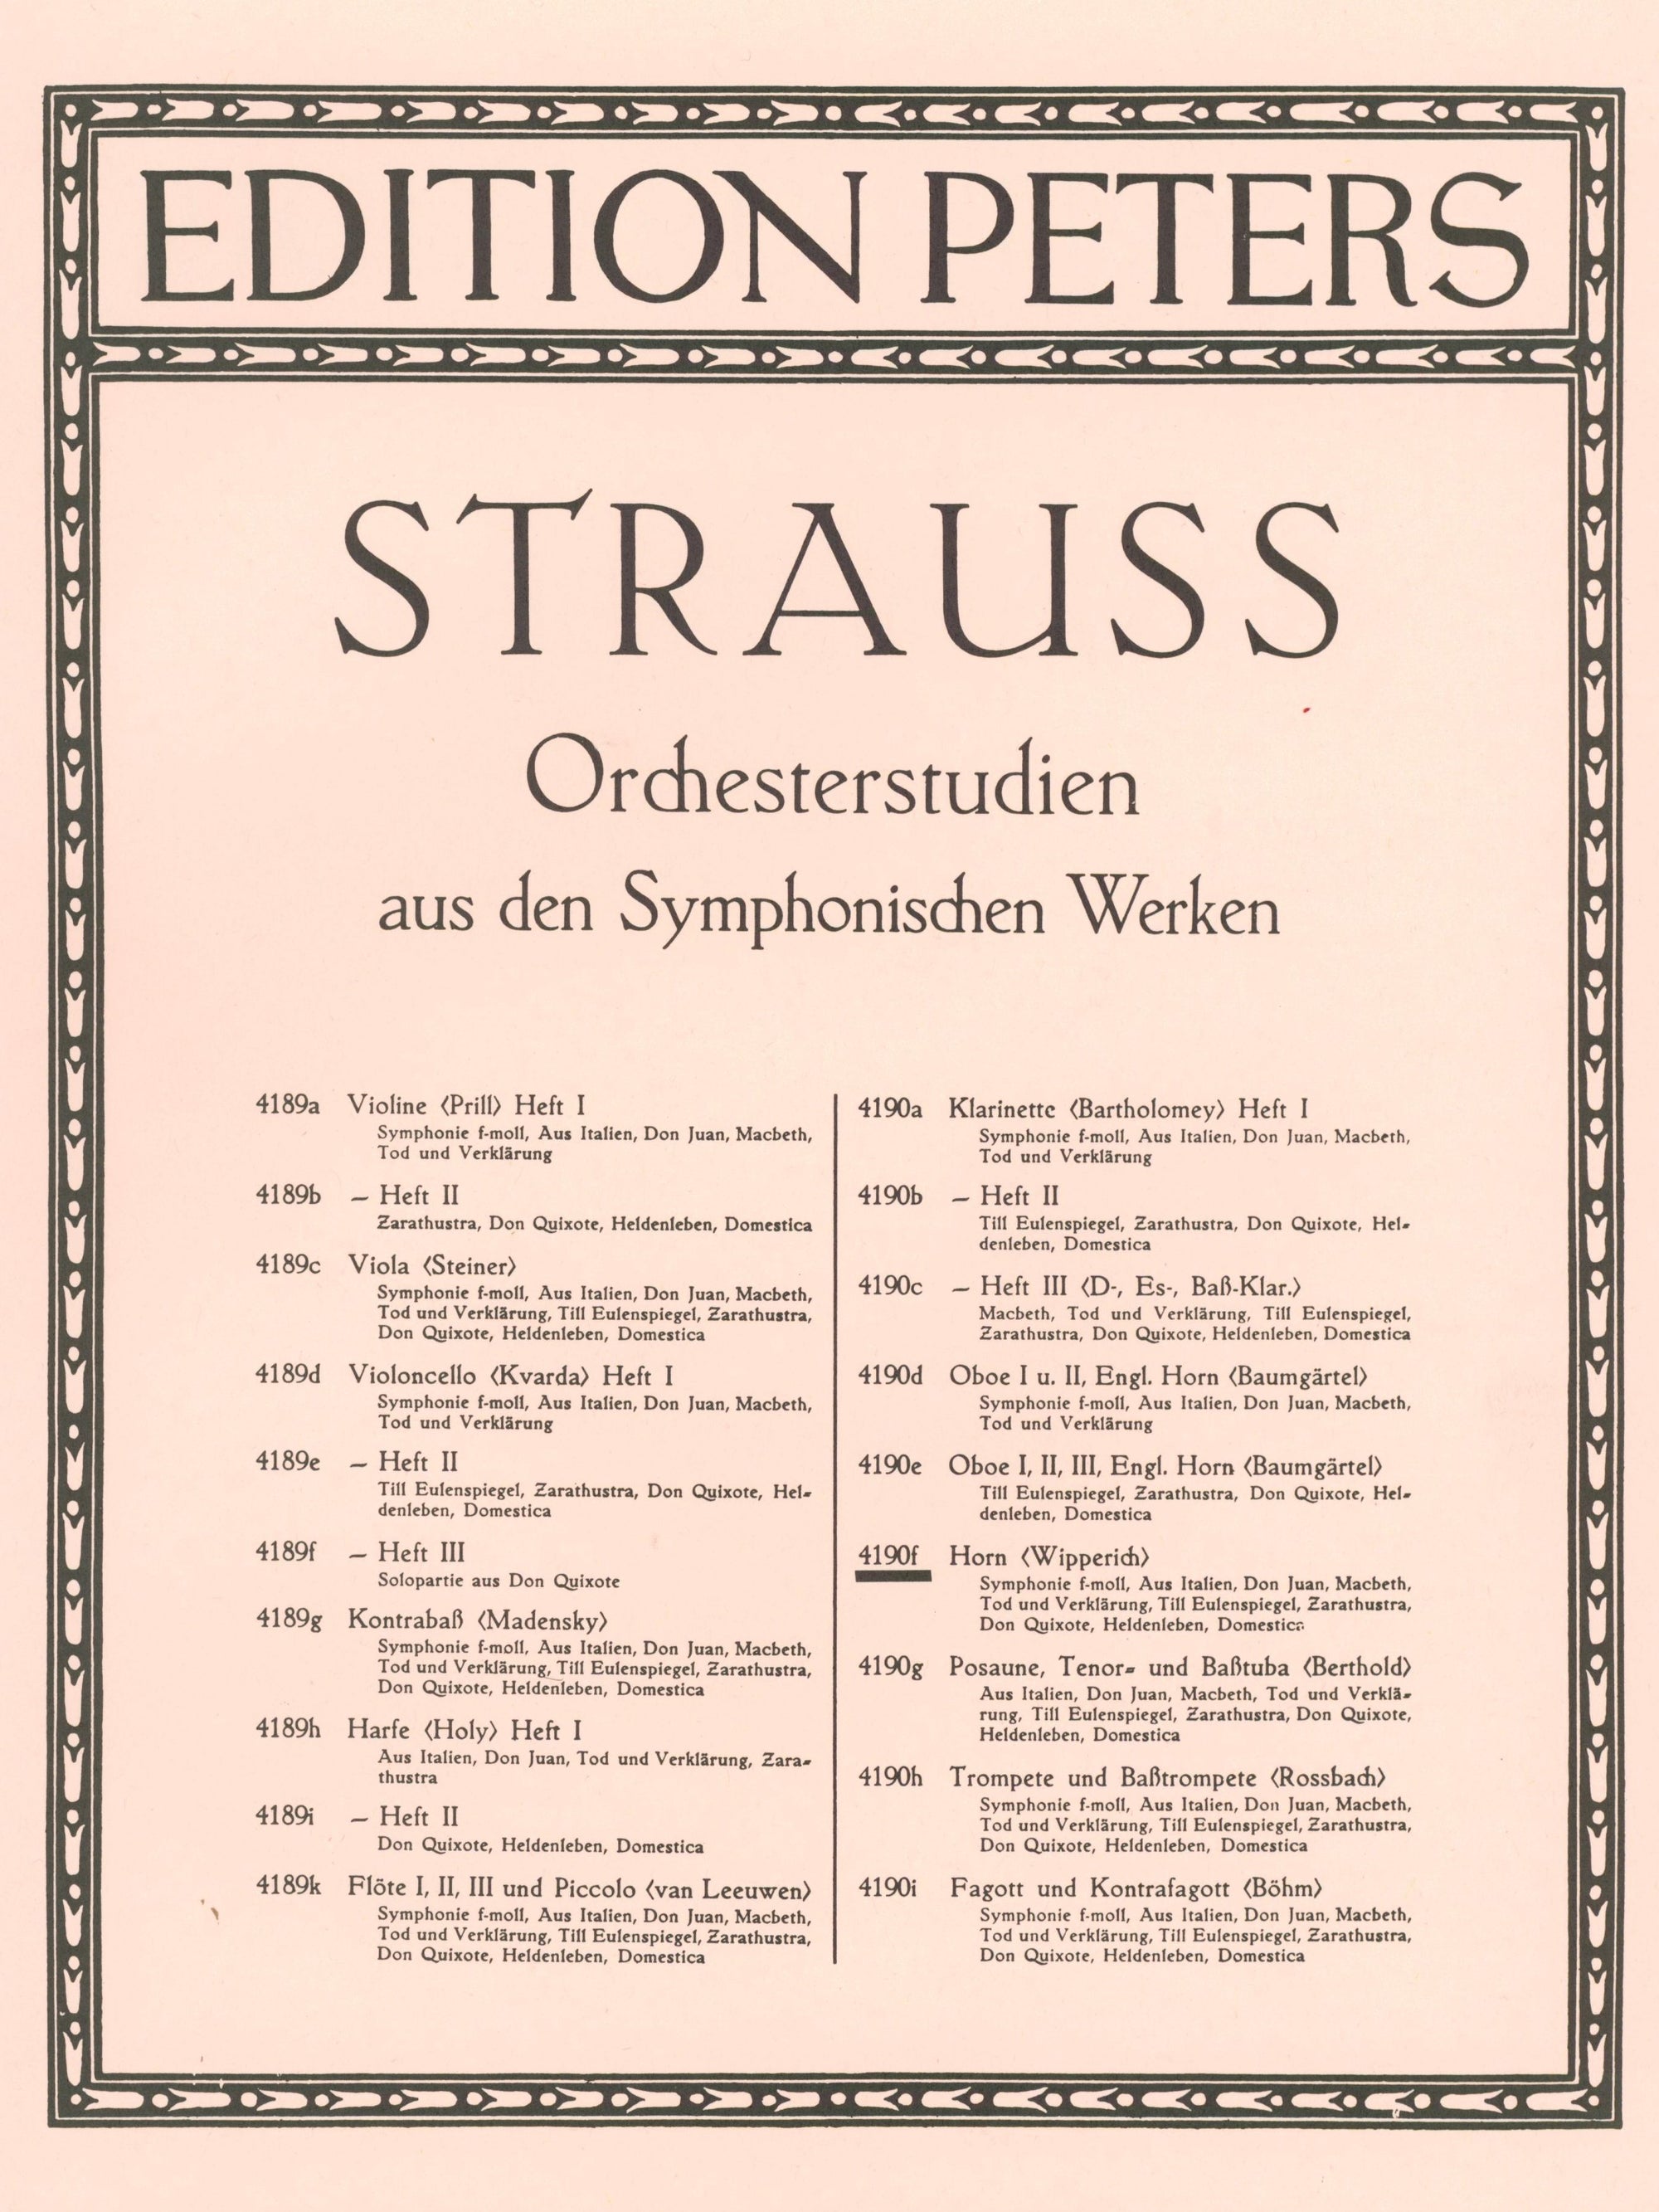 Strauss: Orchestral Excerpts from Symphonic Works for Horn